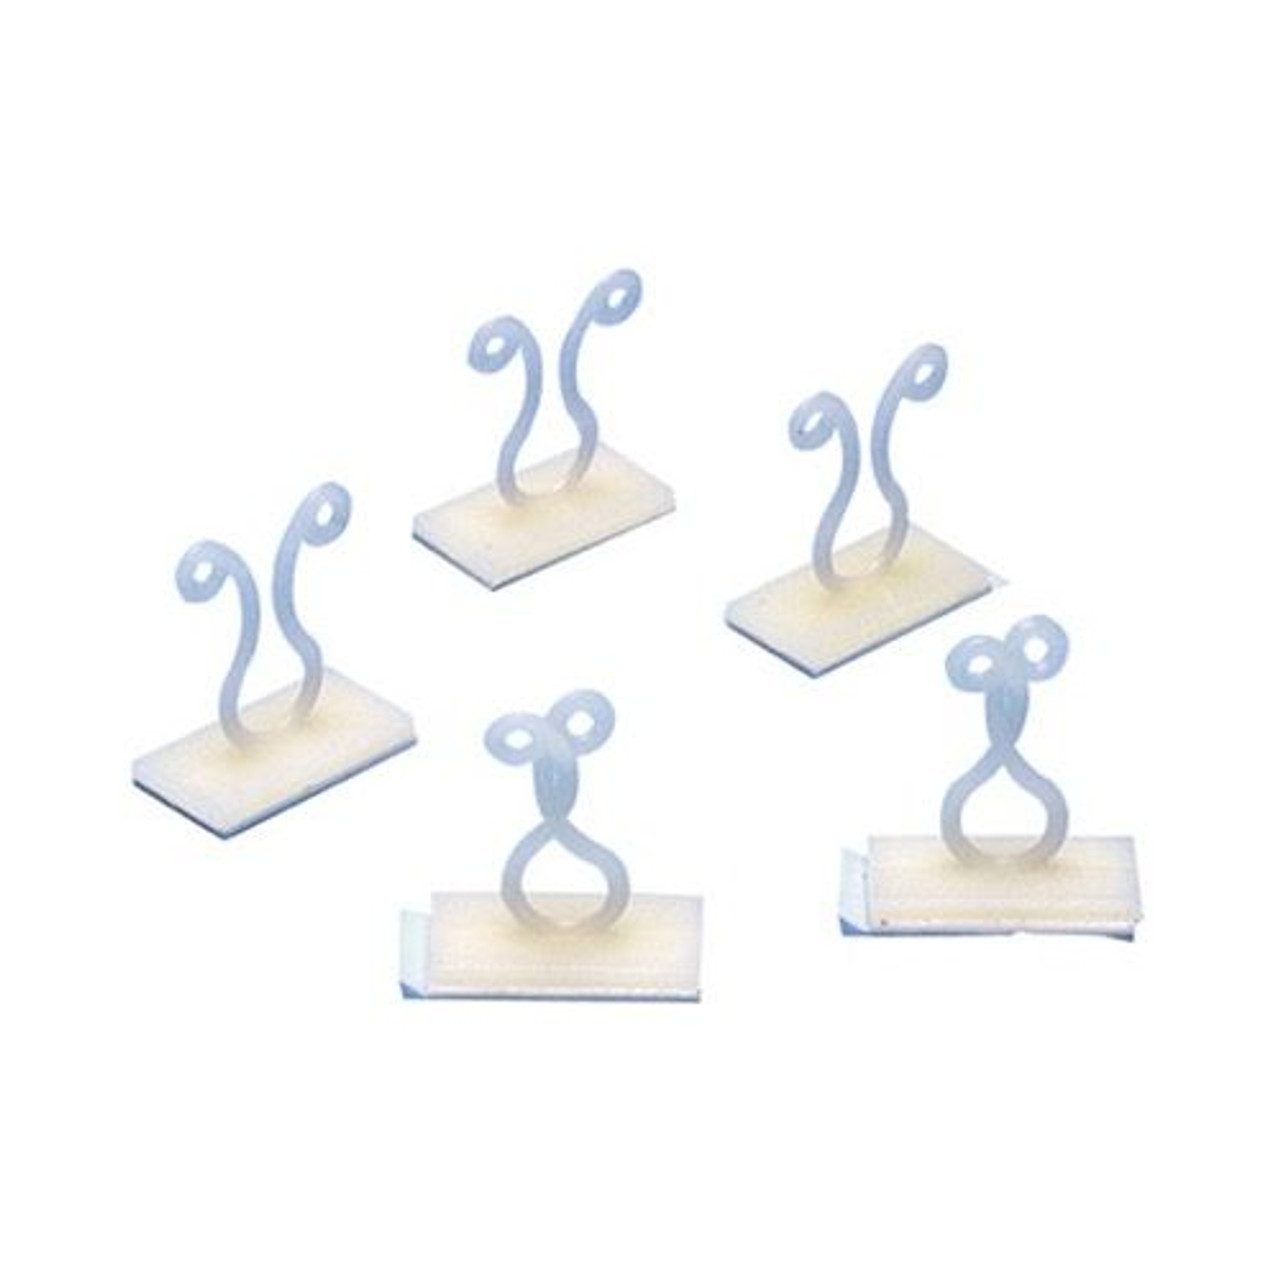 Woods 2705 Cable Twist Clip Fastener Adhesive Pad 5 Pack Audio Video Coax Data Signal Speaker Wire Straps Holder Clip, Ivory